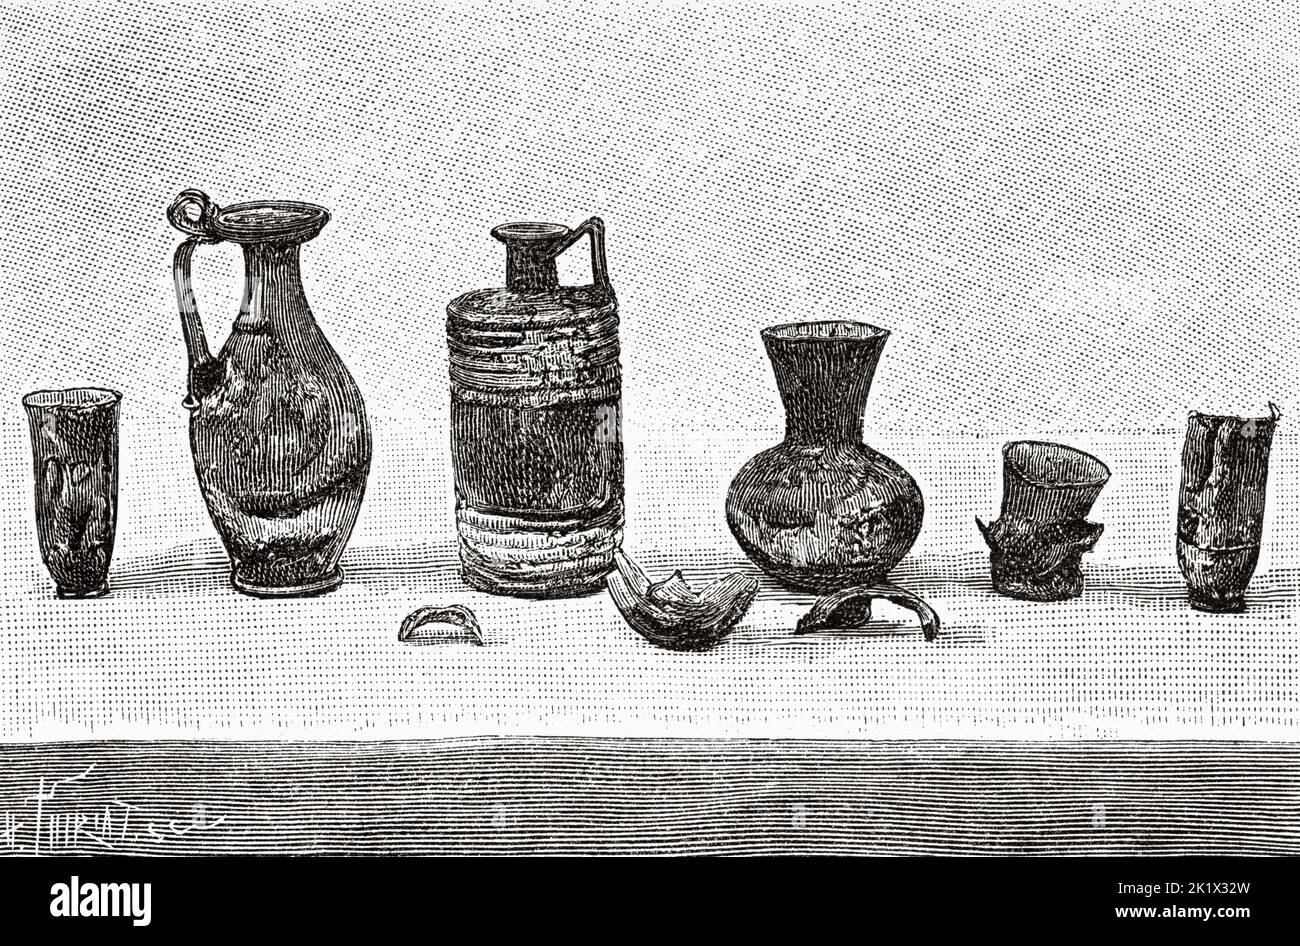 Gallo-Roman burial discovered in the cemetery of Beauvais, glass vases found in the sarcophagus. France. Old 19th century engraved illustration from La Nature 1890 Stock Photo